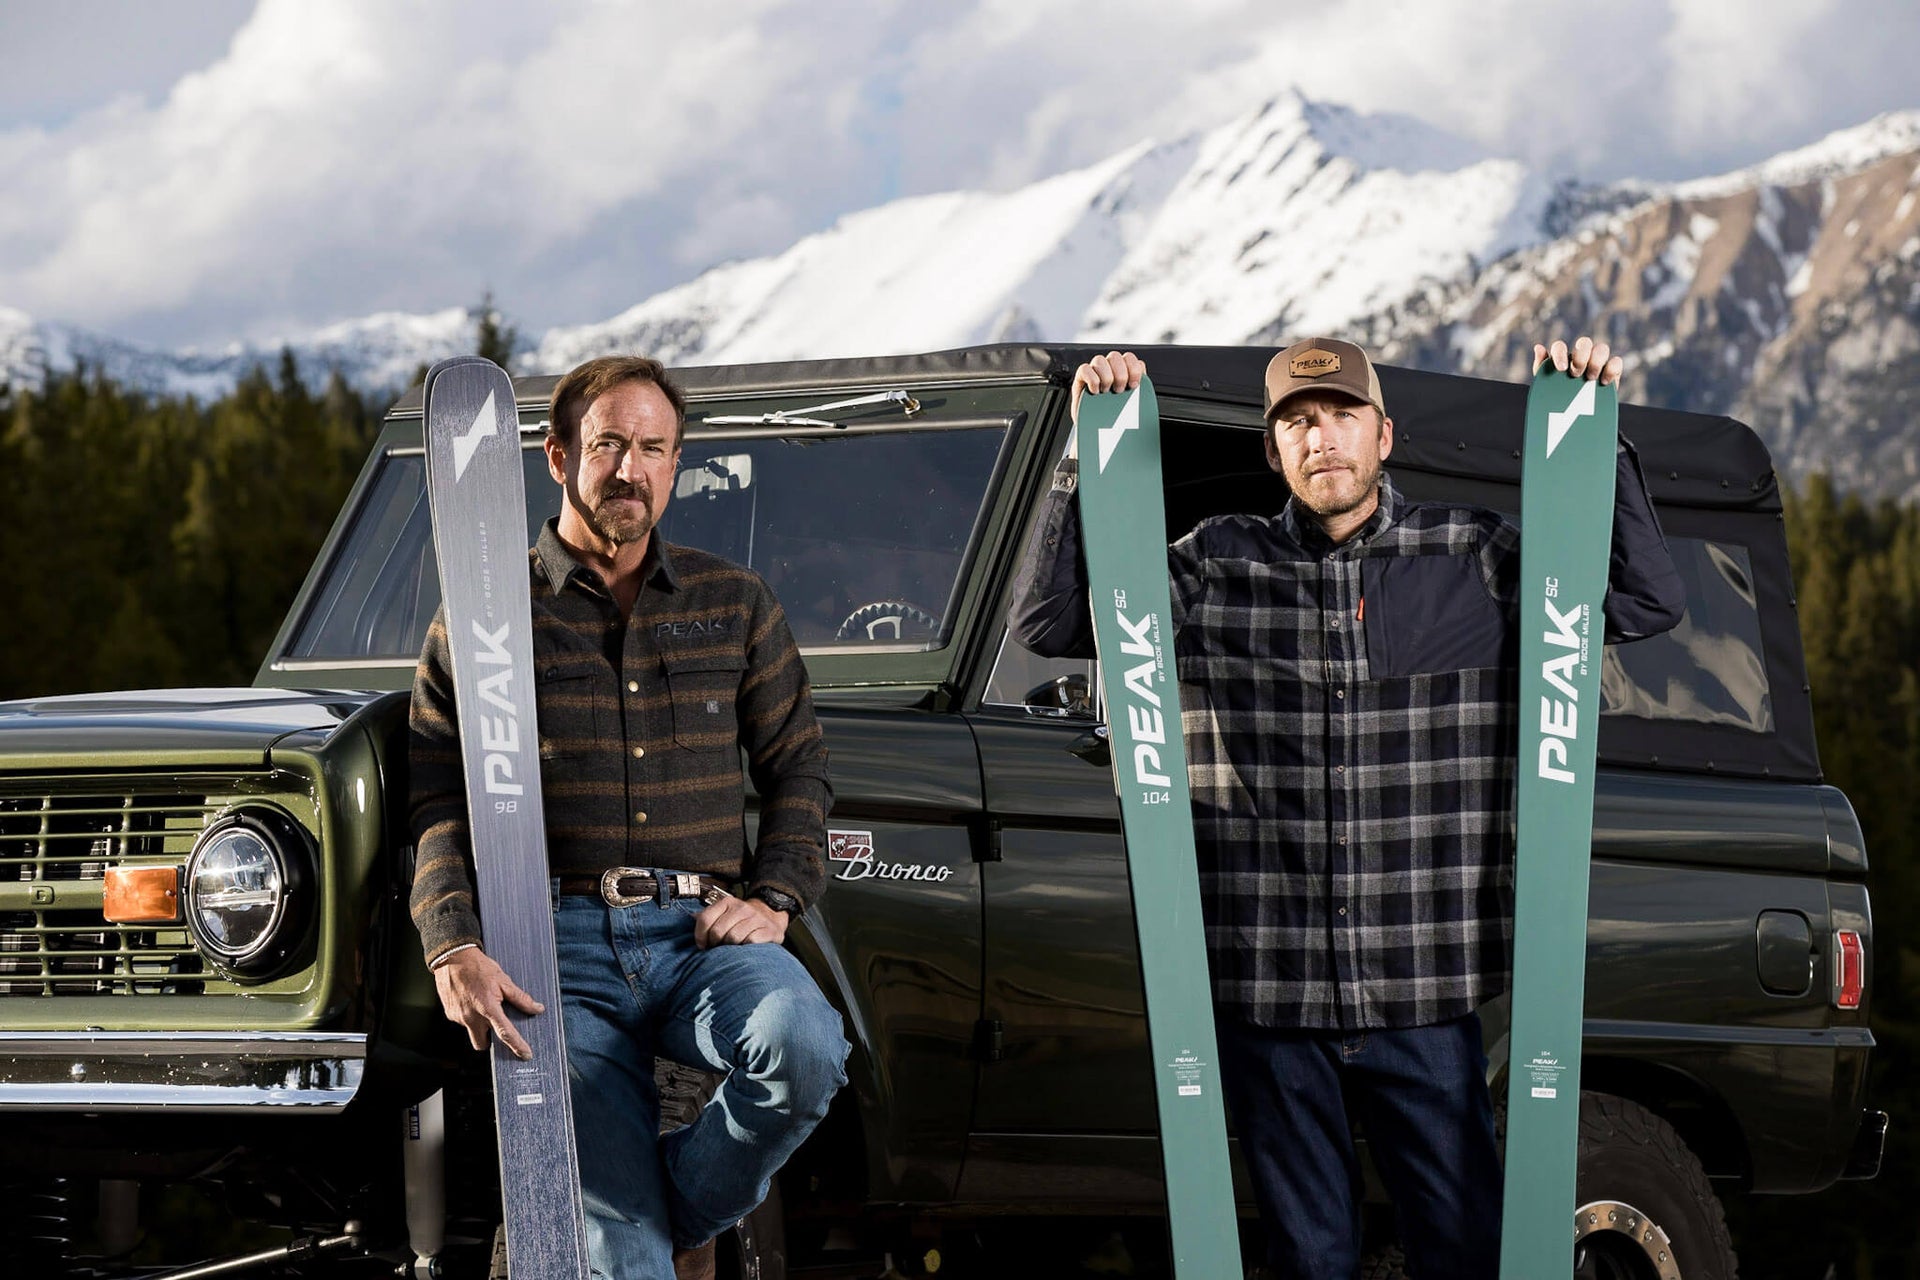 Bode Miller and Andy Wirth standing with skis in front of a truck